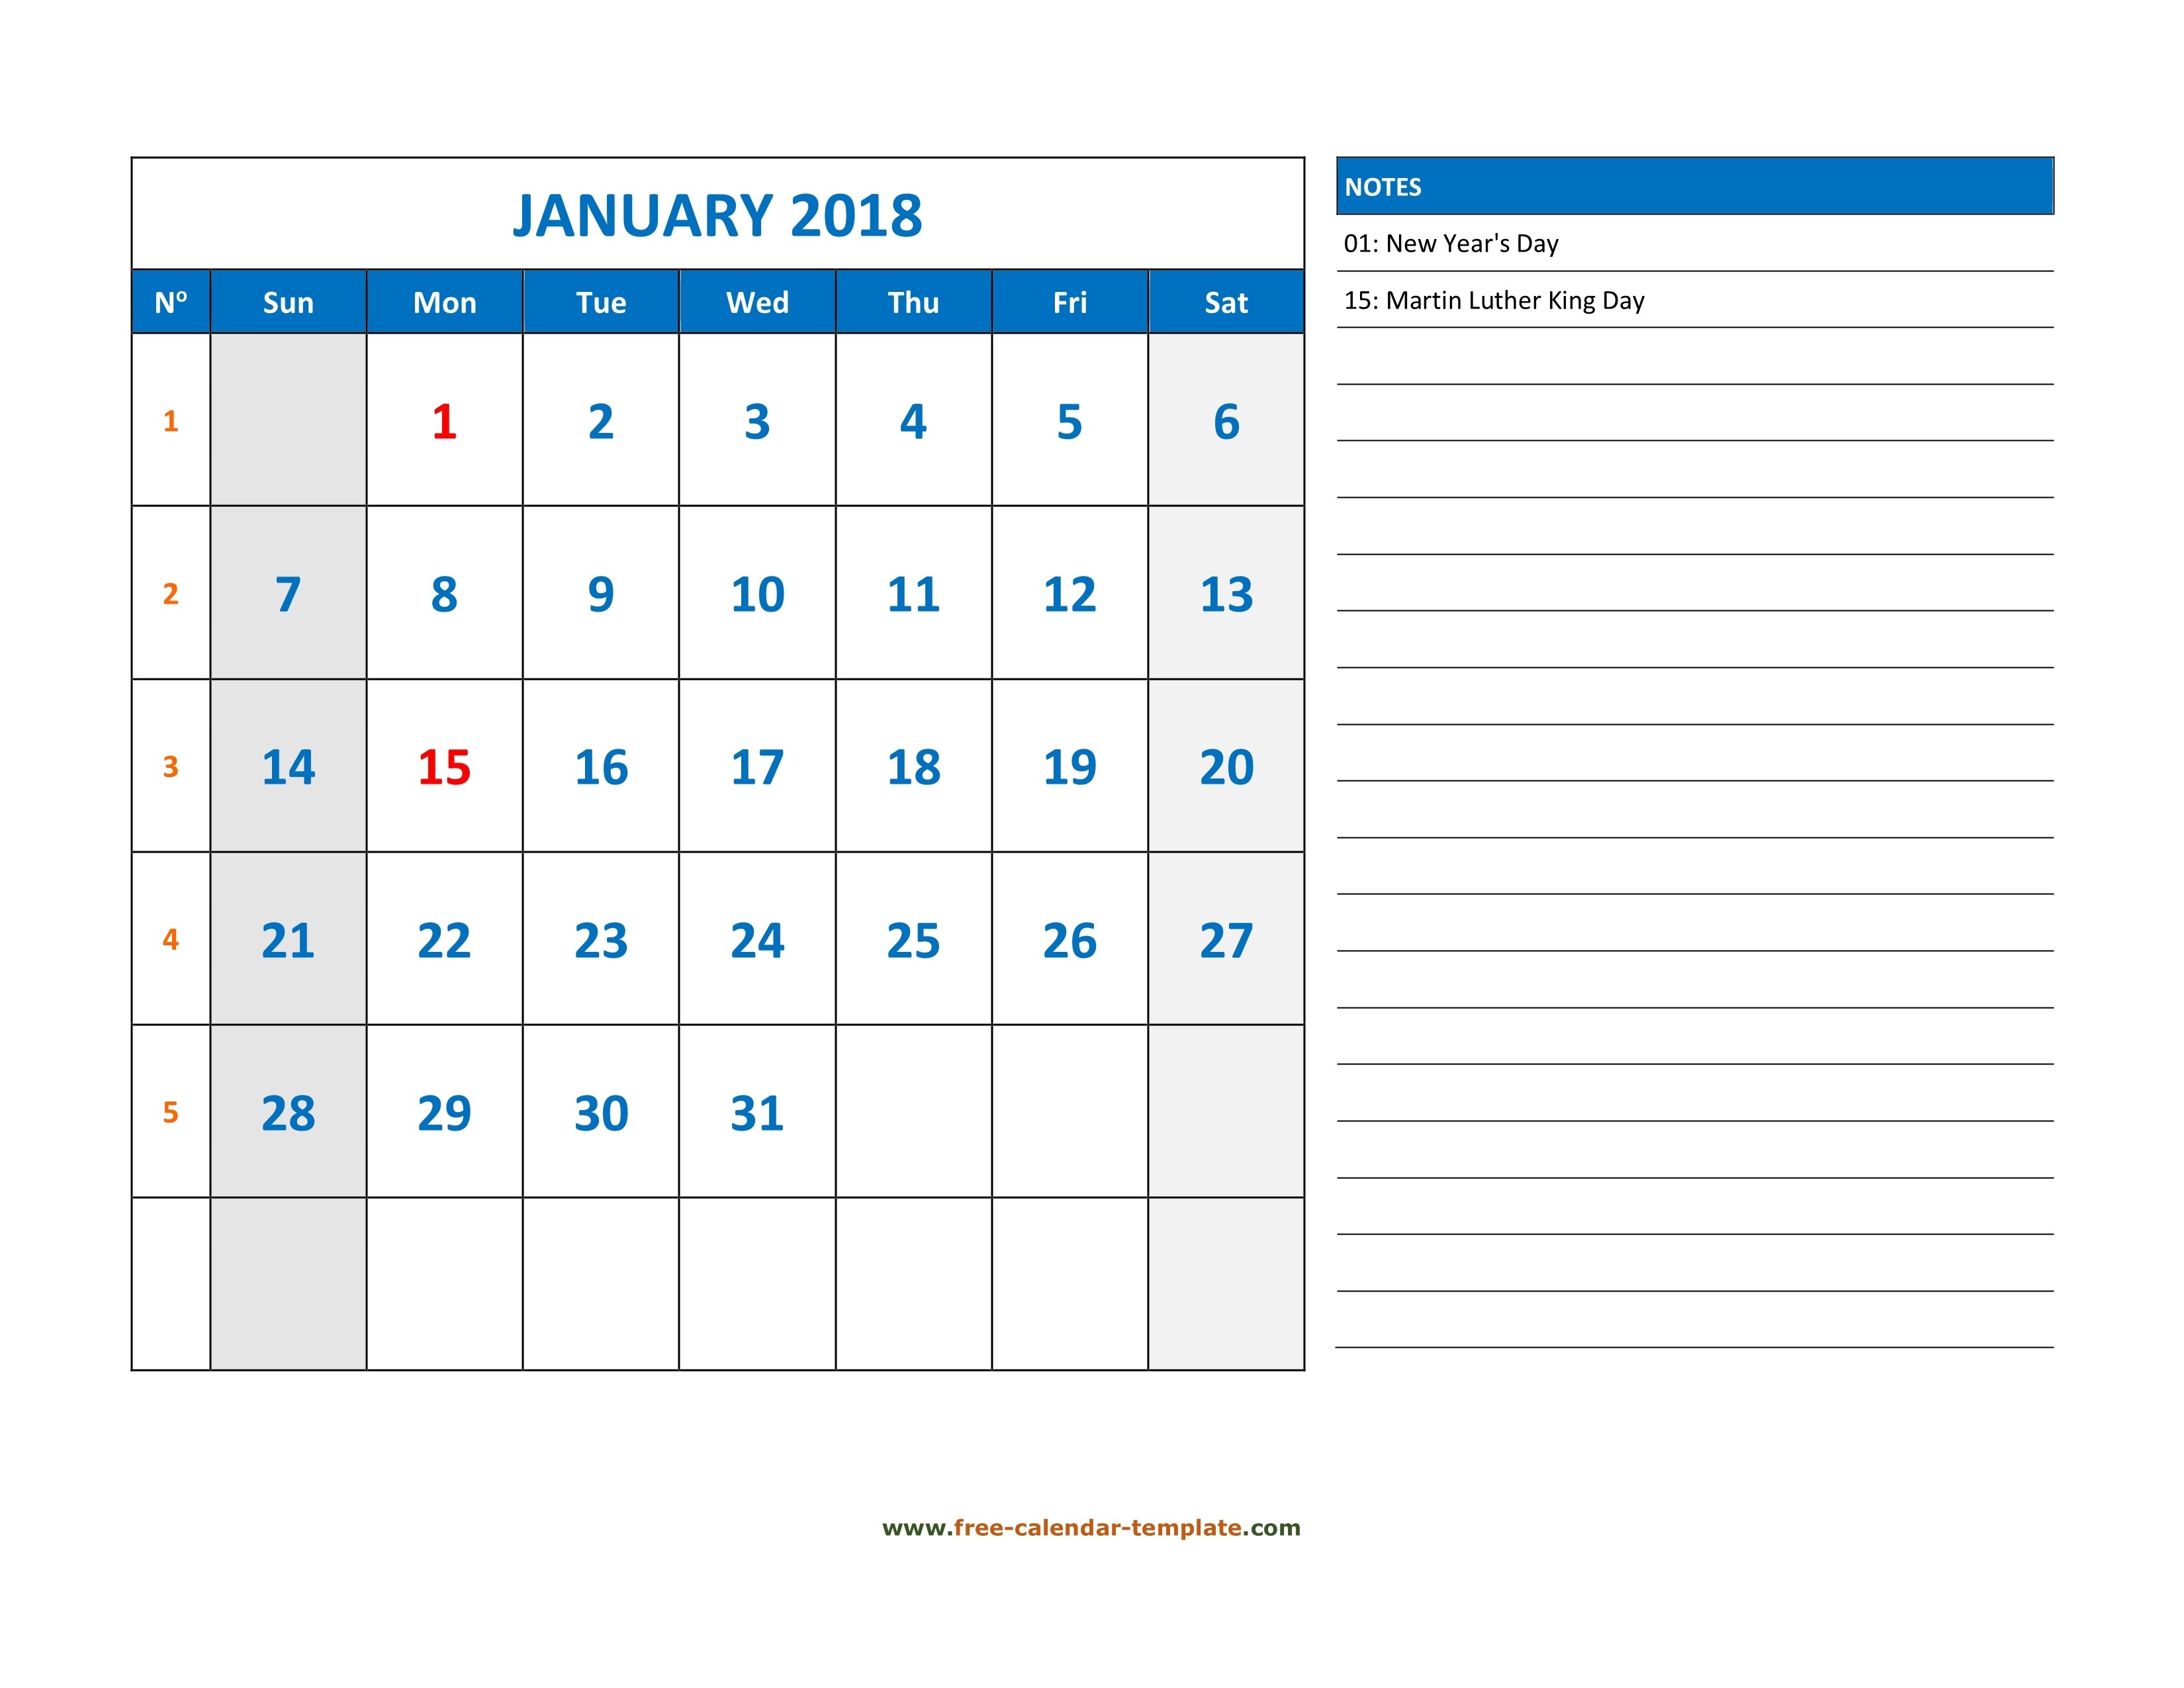 Monthly Calendar 2018 Grid Lines For Holidays And Notes-Free Blanks Calendar Printable With Notes And Lines